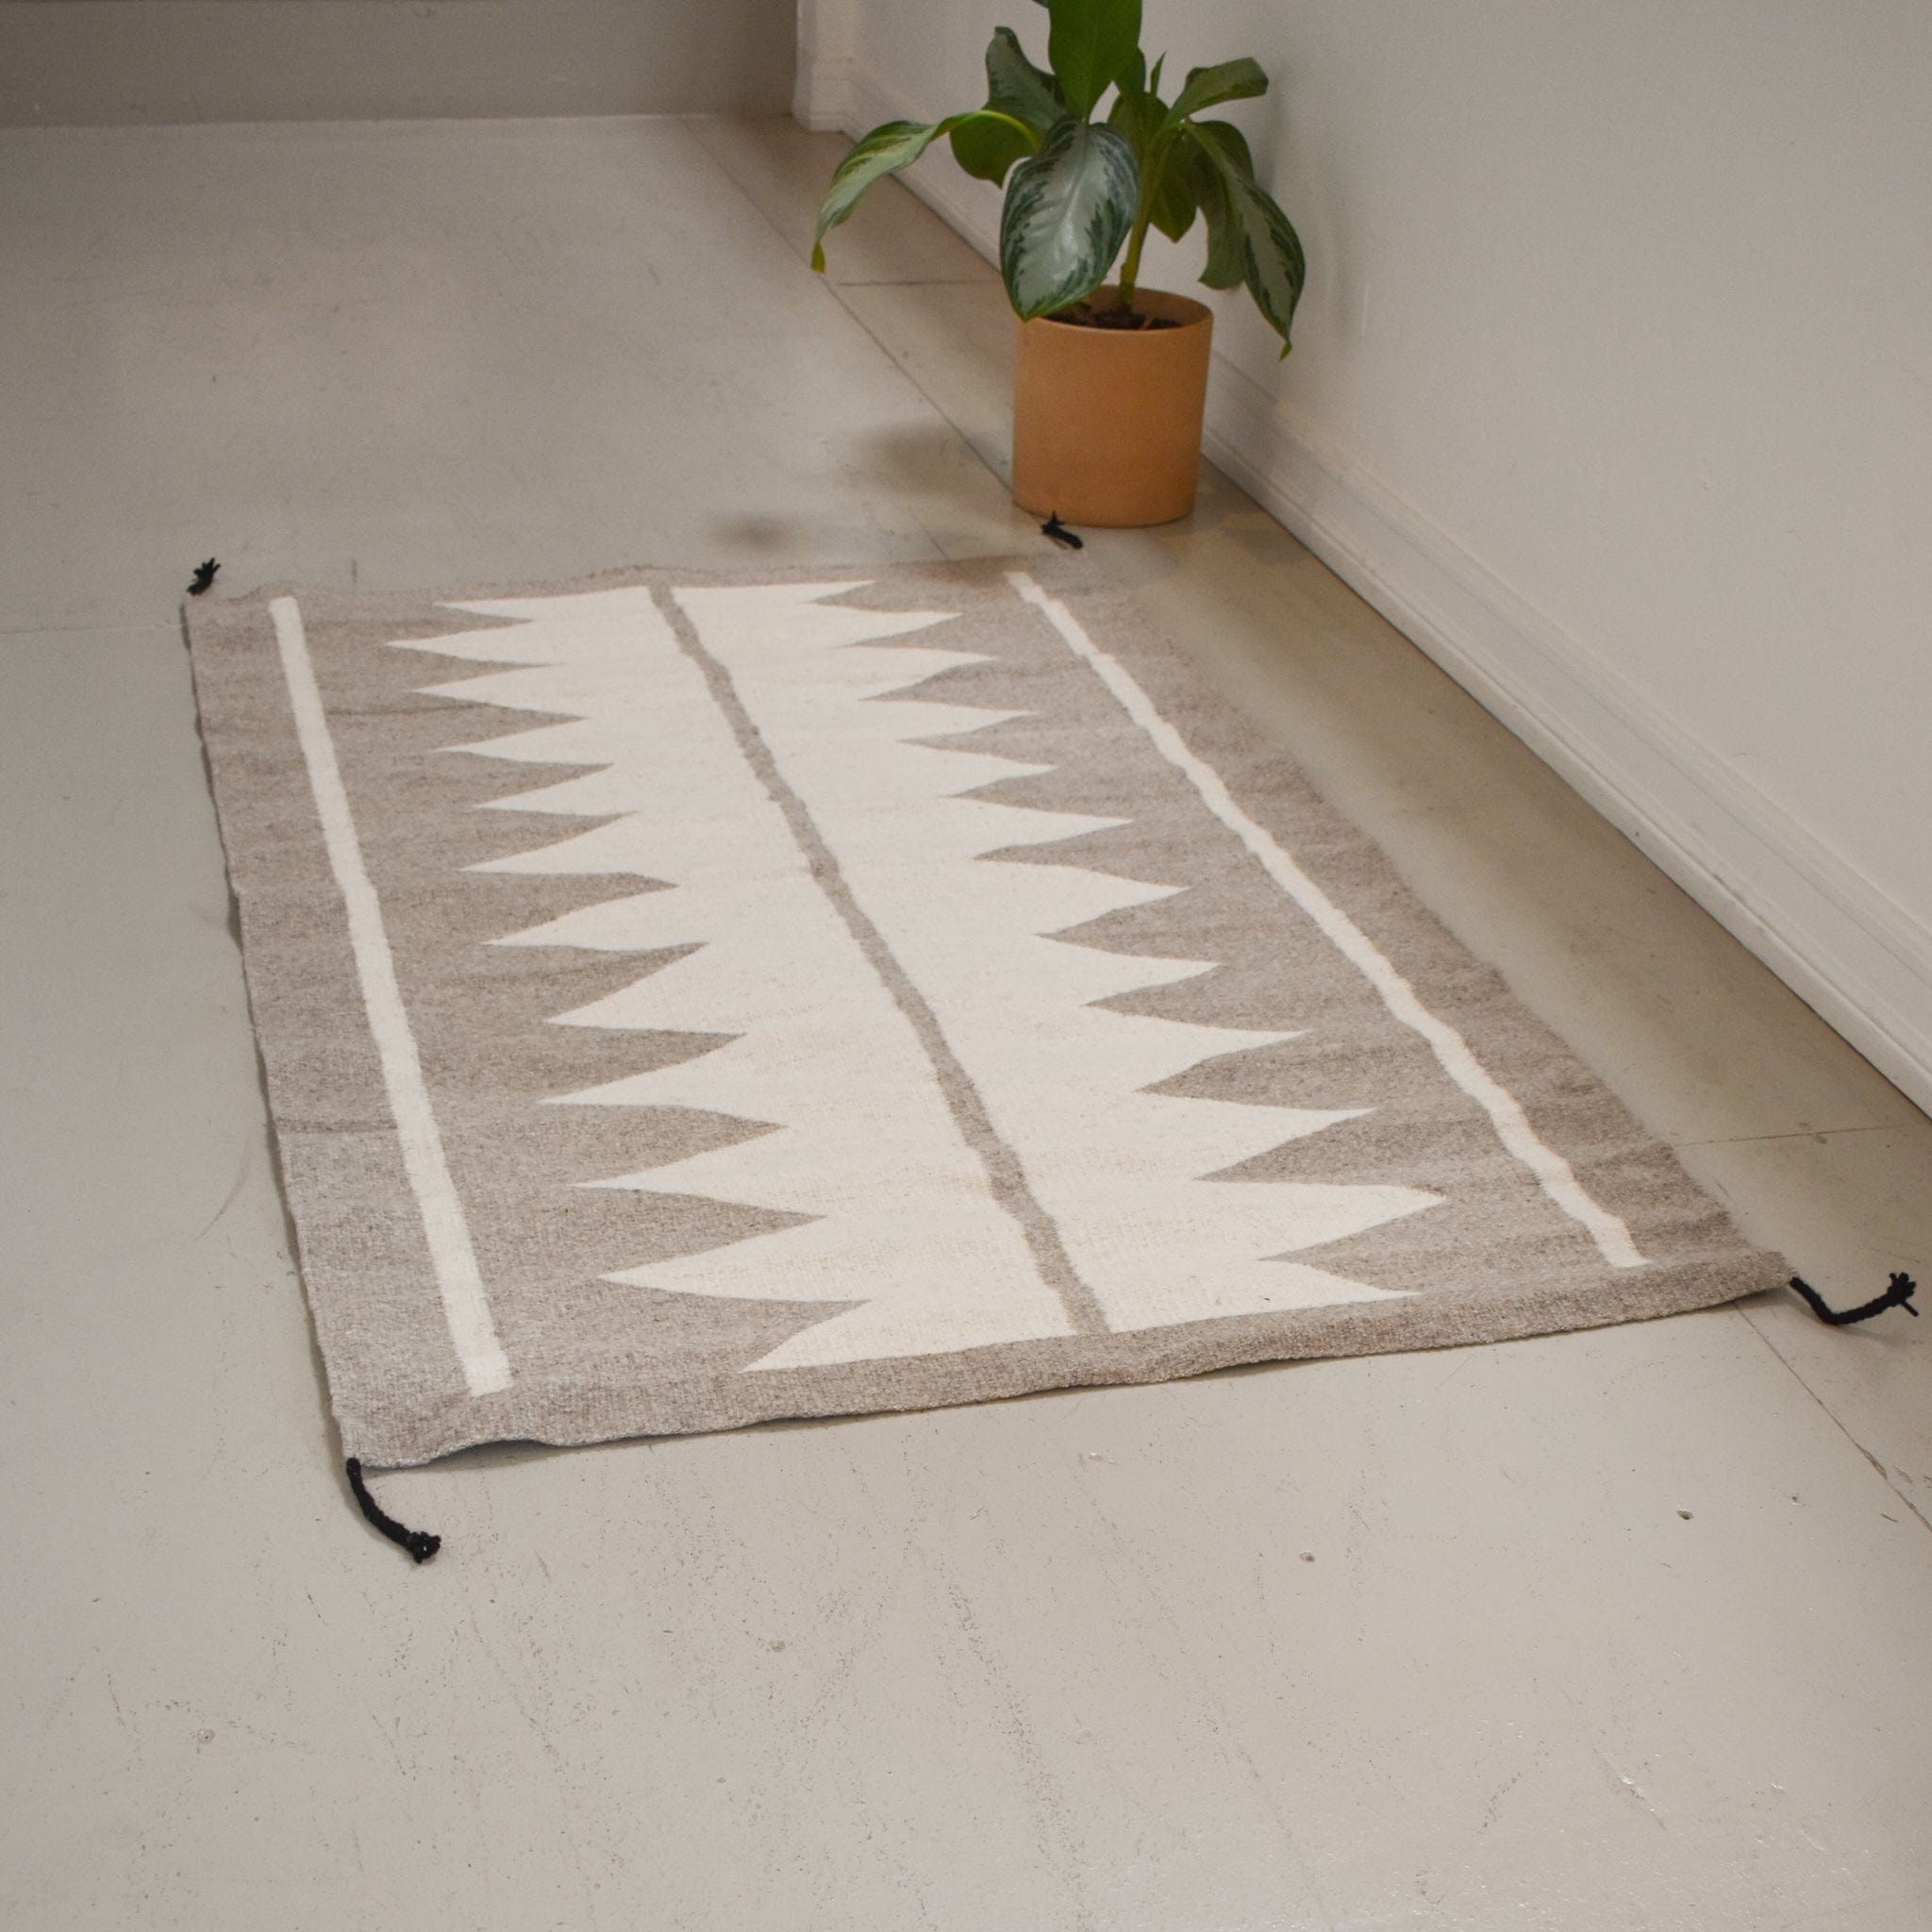 Archive New York Decor Zapotec Natural and Grey Rug with Black Tassels - 3 x 5